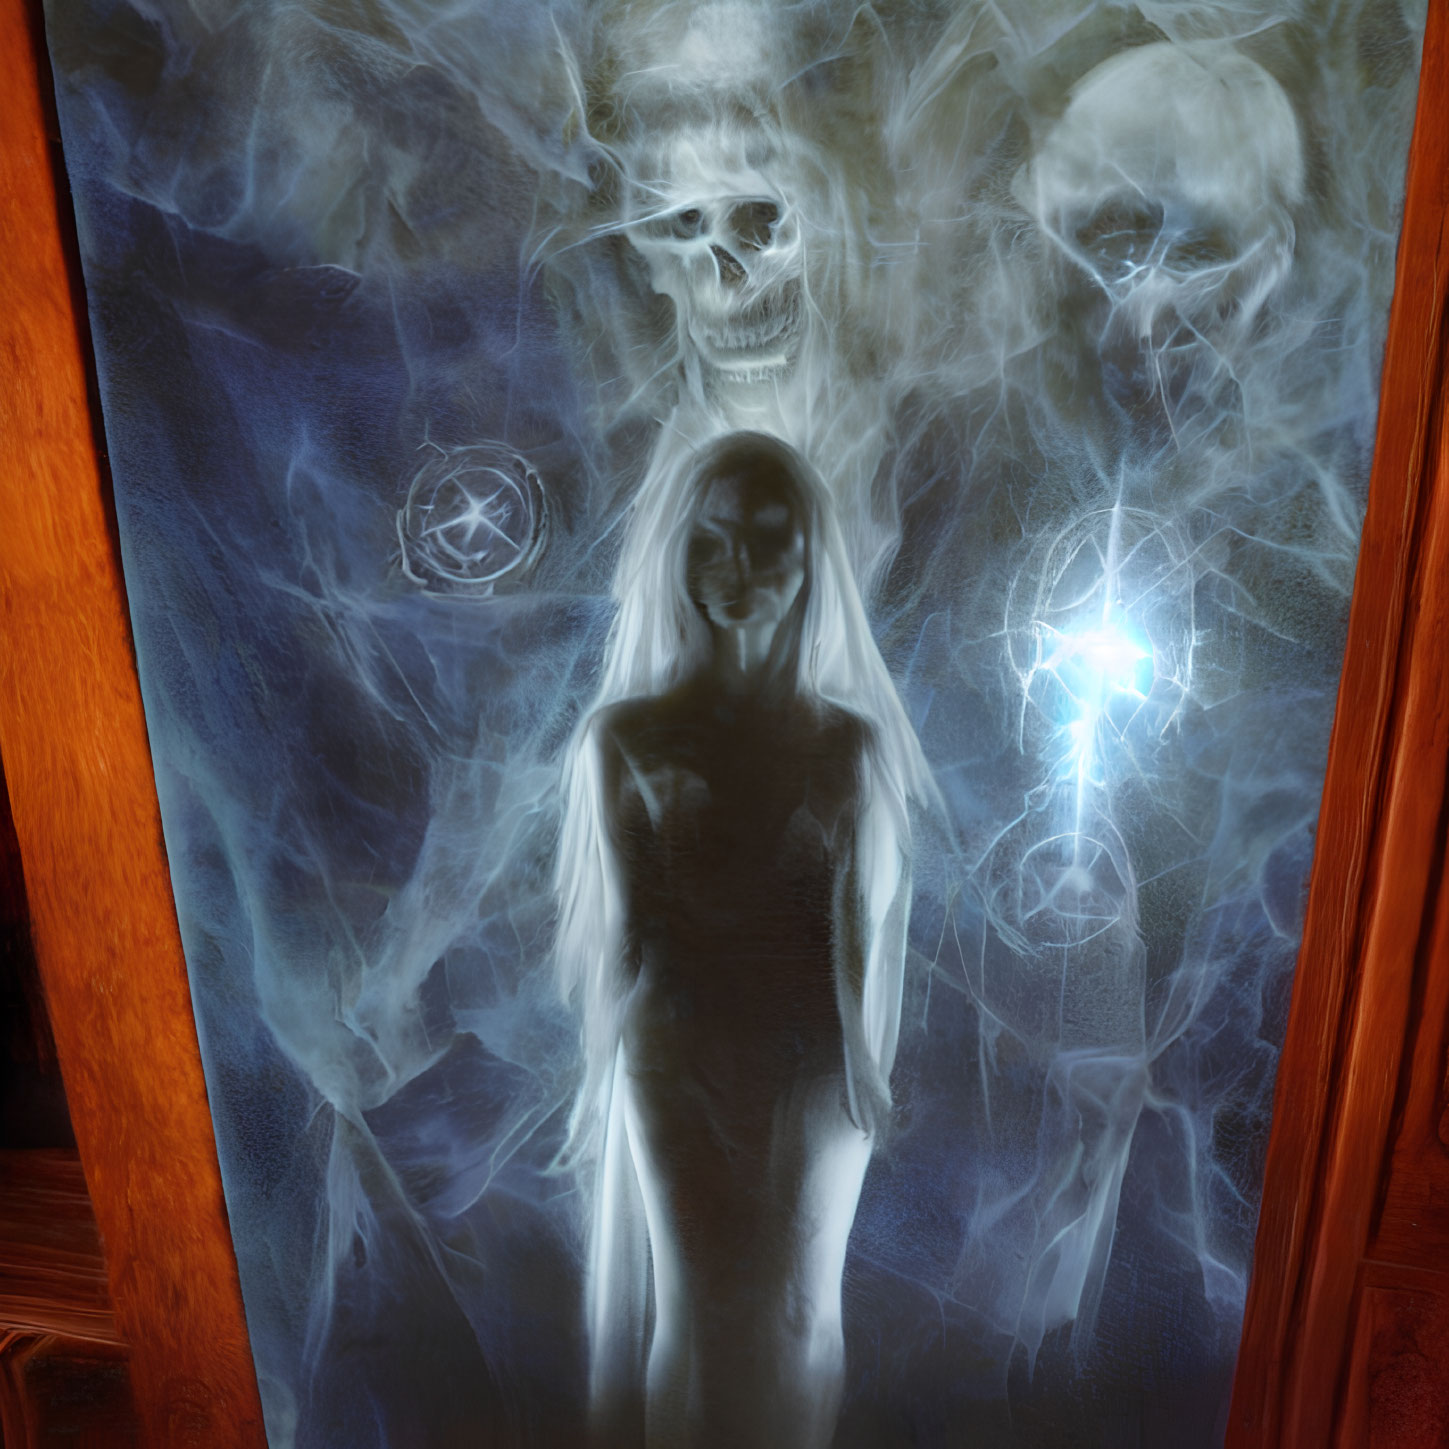 Ghostly figure with glowing eyes and spectral skulls in eerie setting